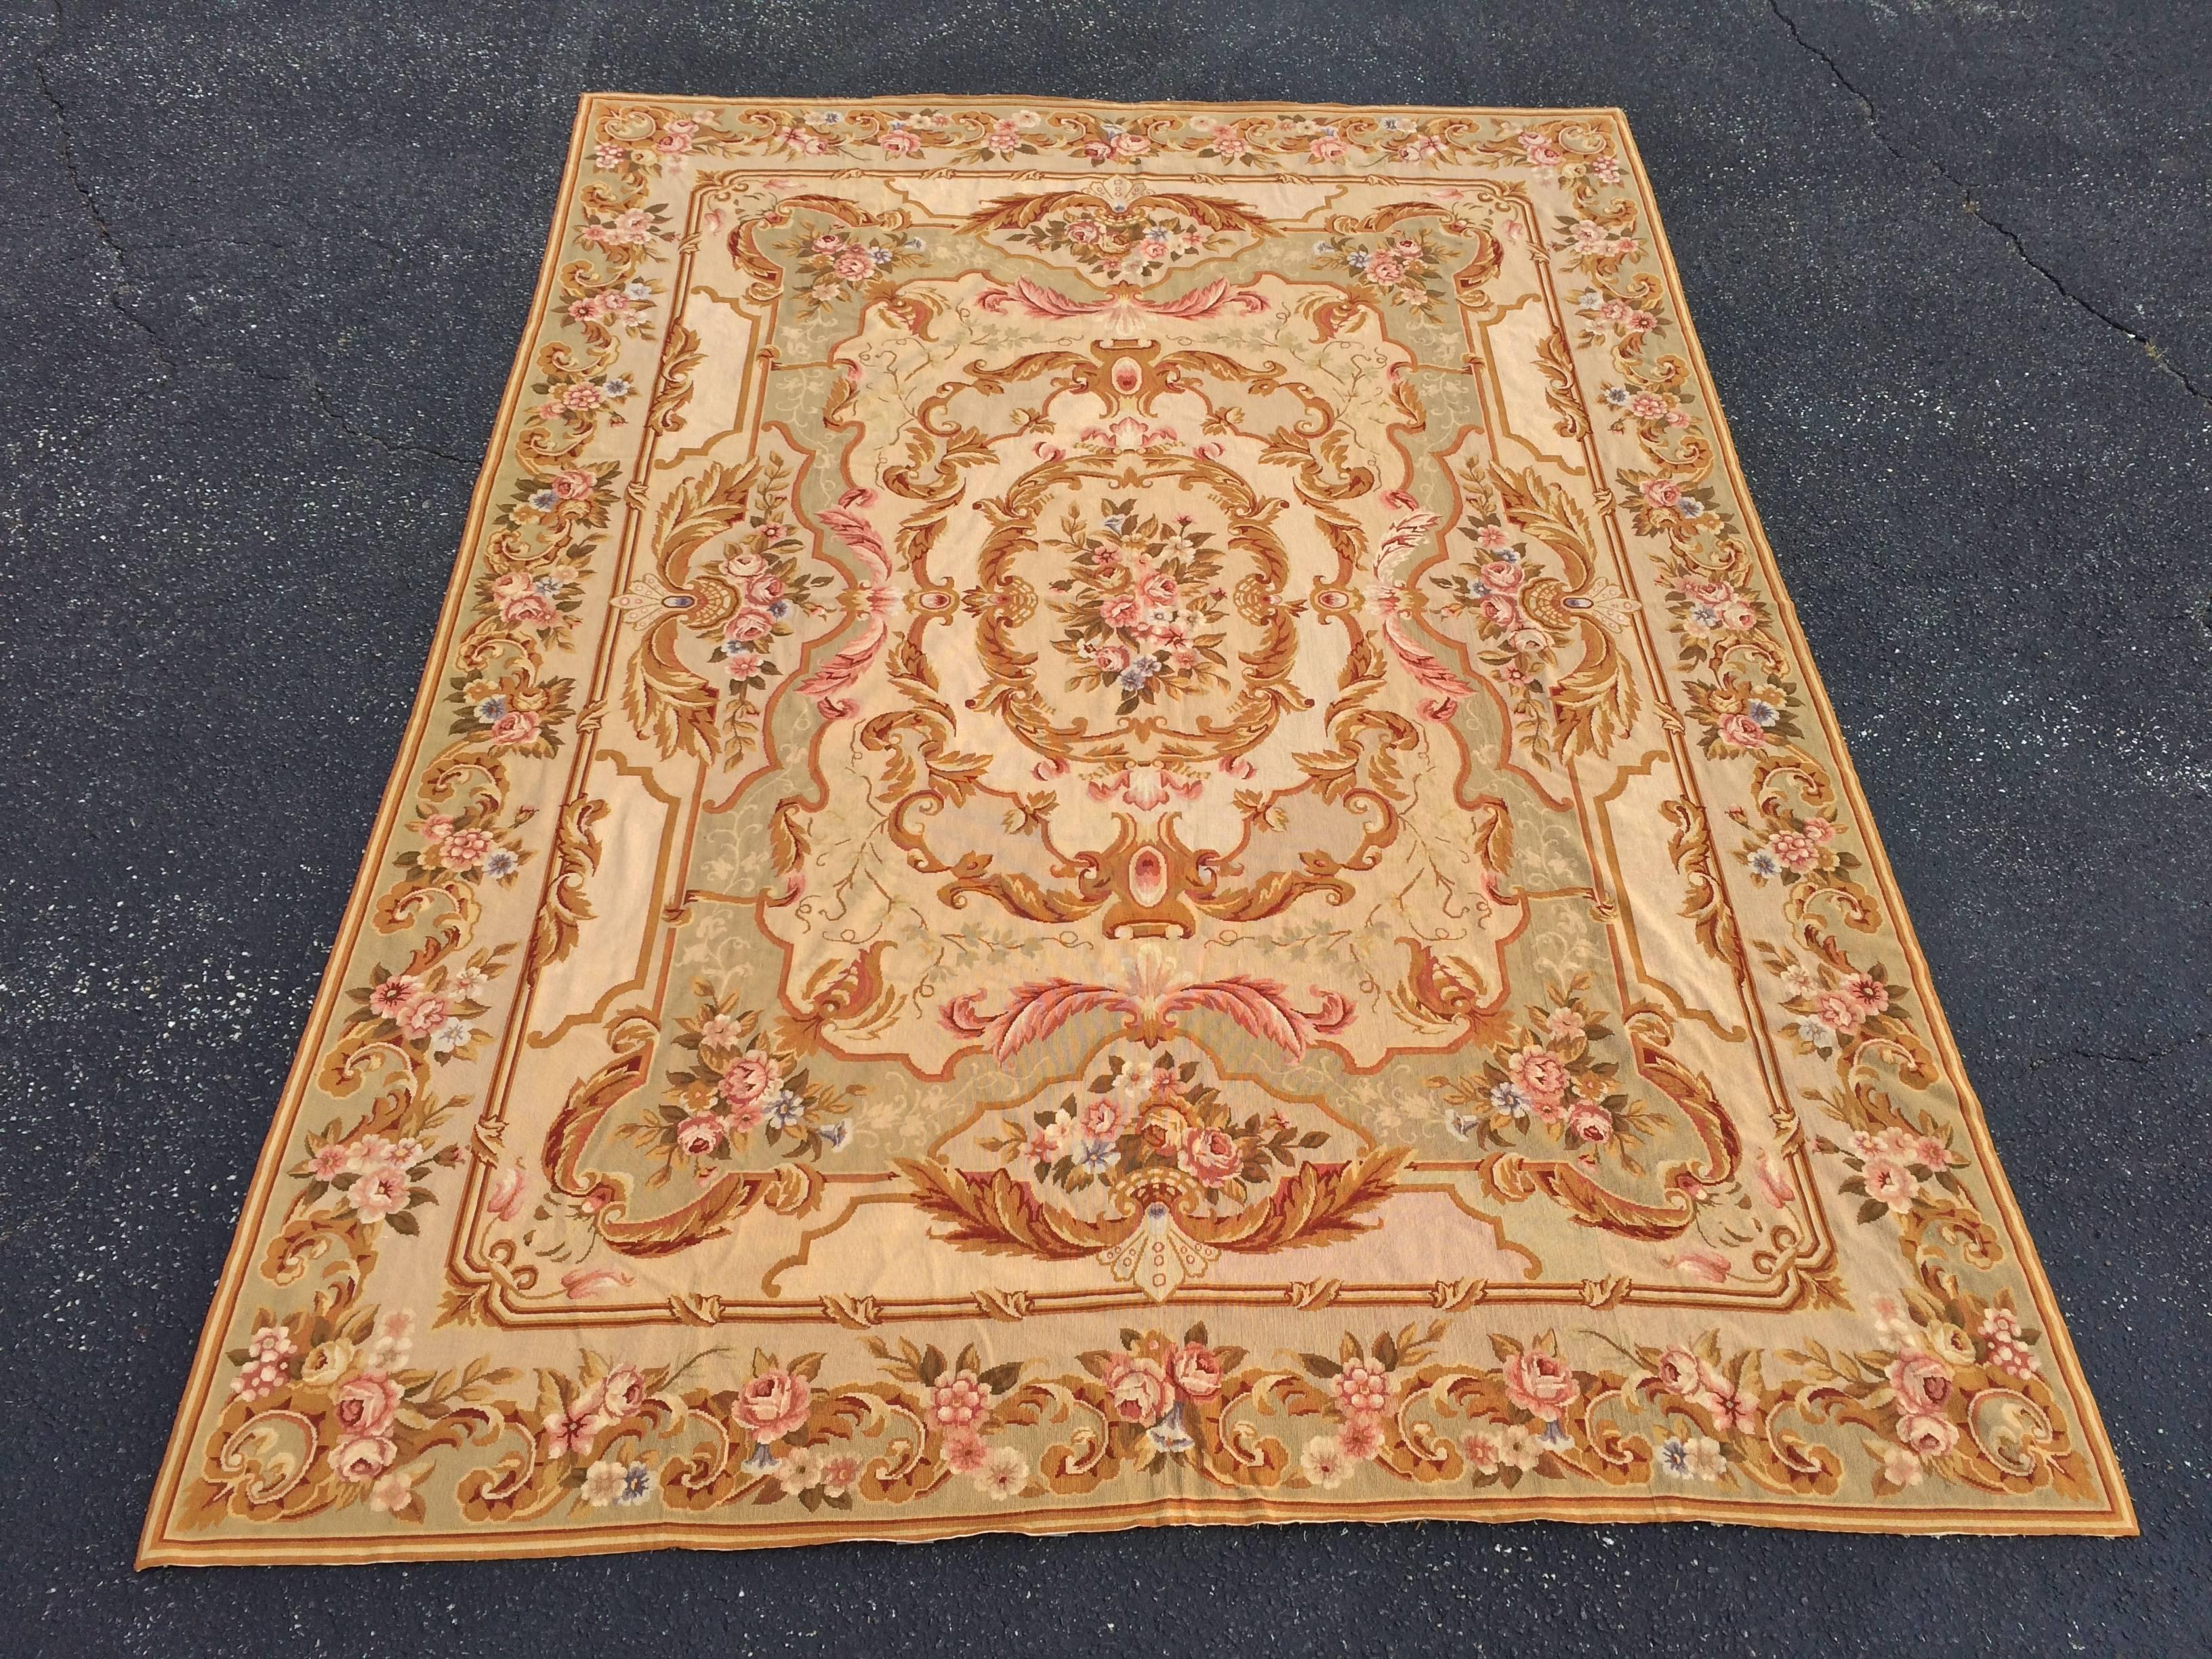 Room Size Aubusson needlepoint rug measure: 9' x 12'. Gold, rust, green and beige tones. 100% wool. Exact measurements: 103 1/2